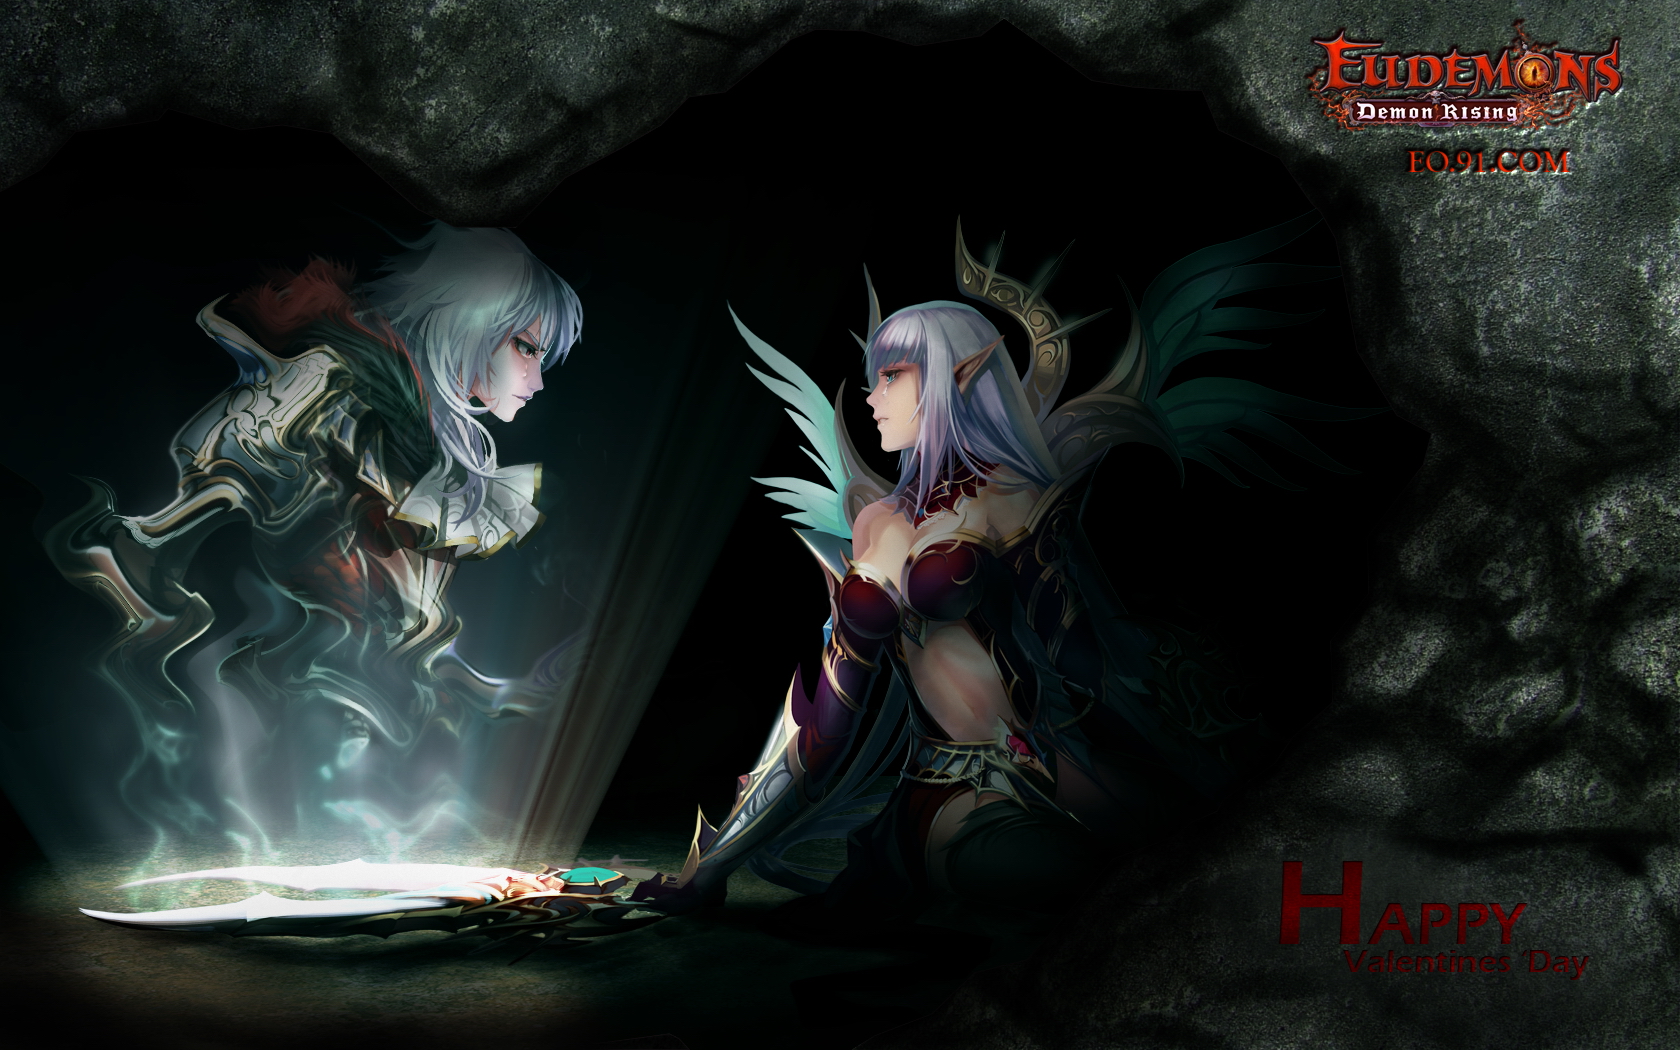 Video Game Eudemons Online 1680x1050